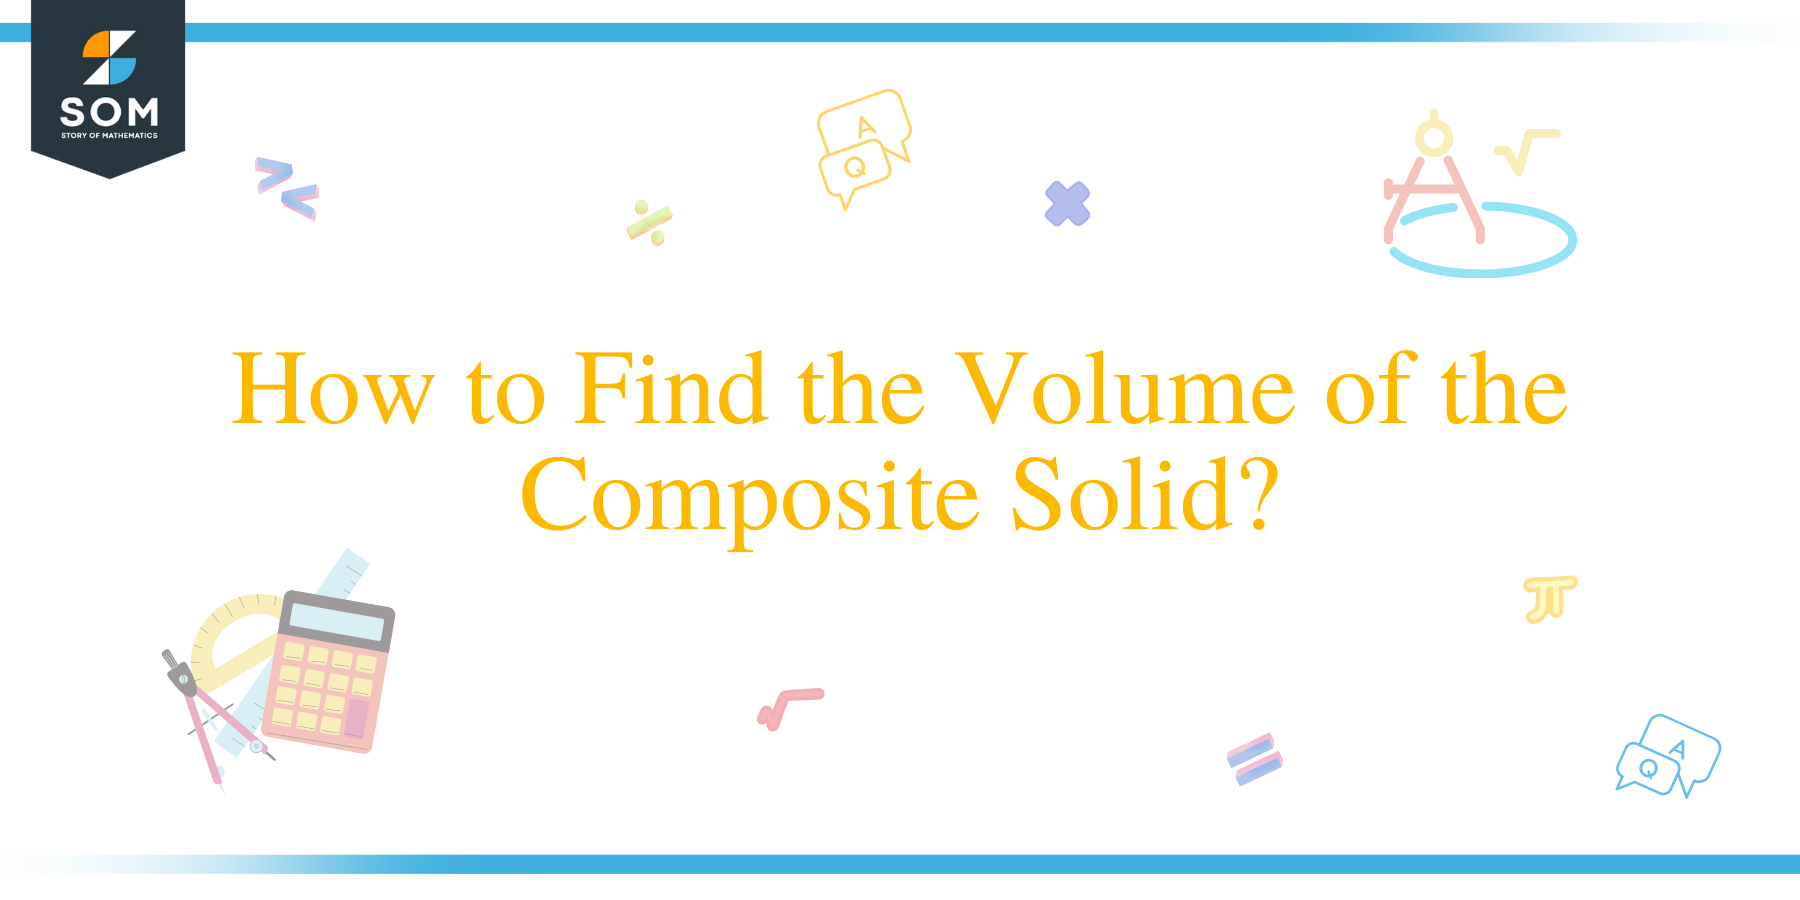 How to Find the Volume of the Composite Solid?